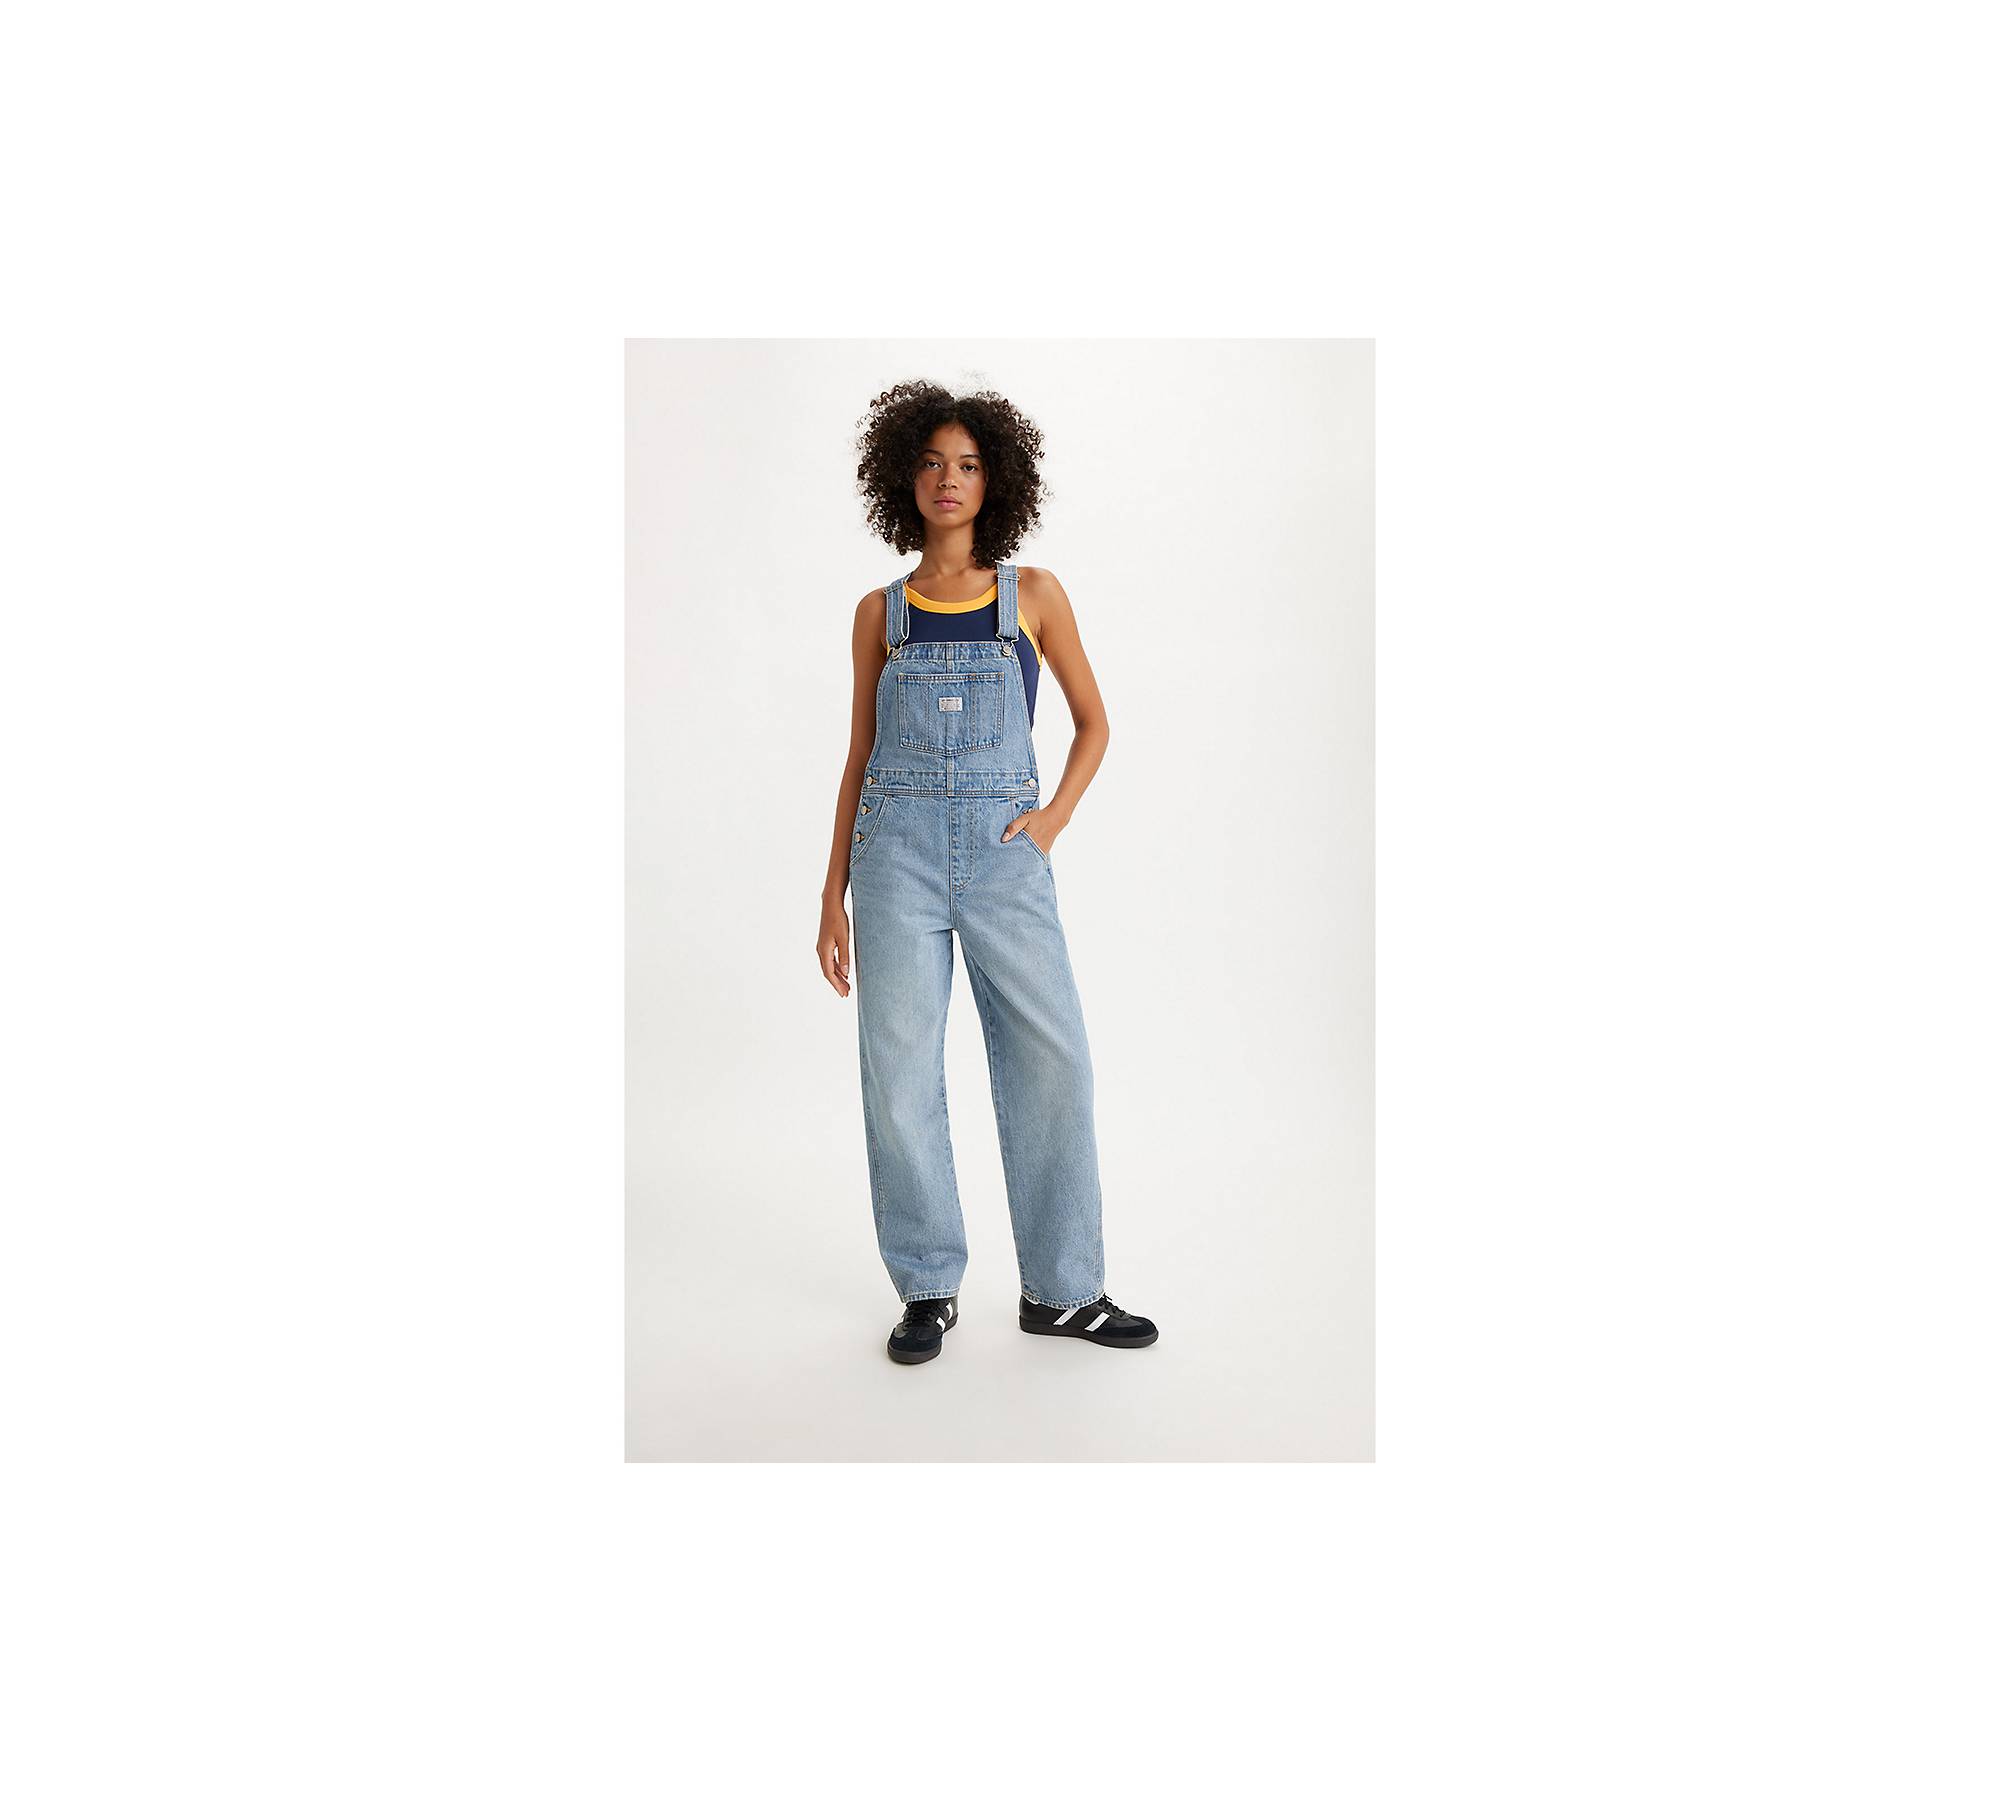 Womens Fashion Slim Jeans Jumpsuit Denim Overall Hot Shorts Suspenders  Dungarees